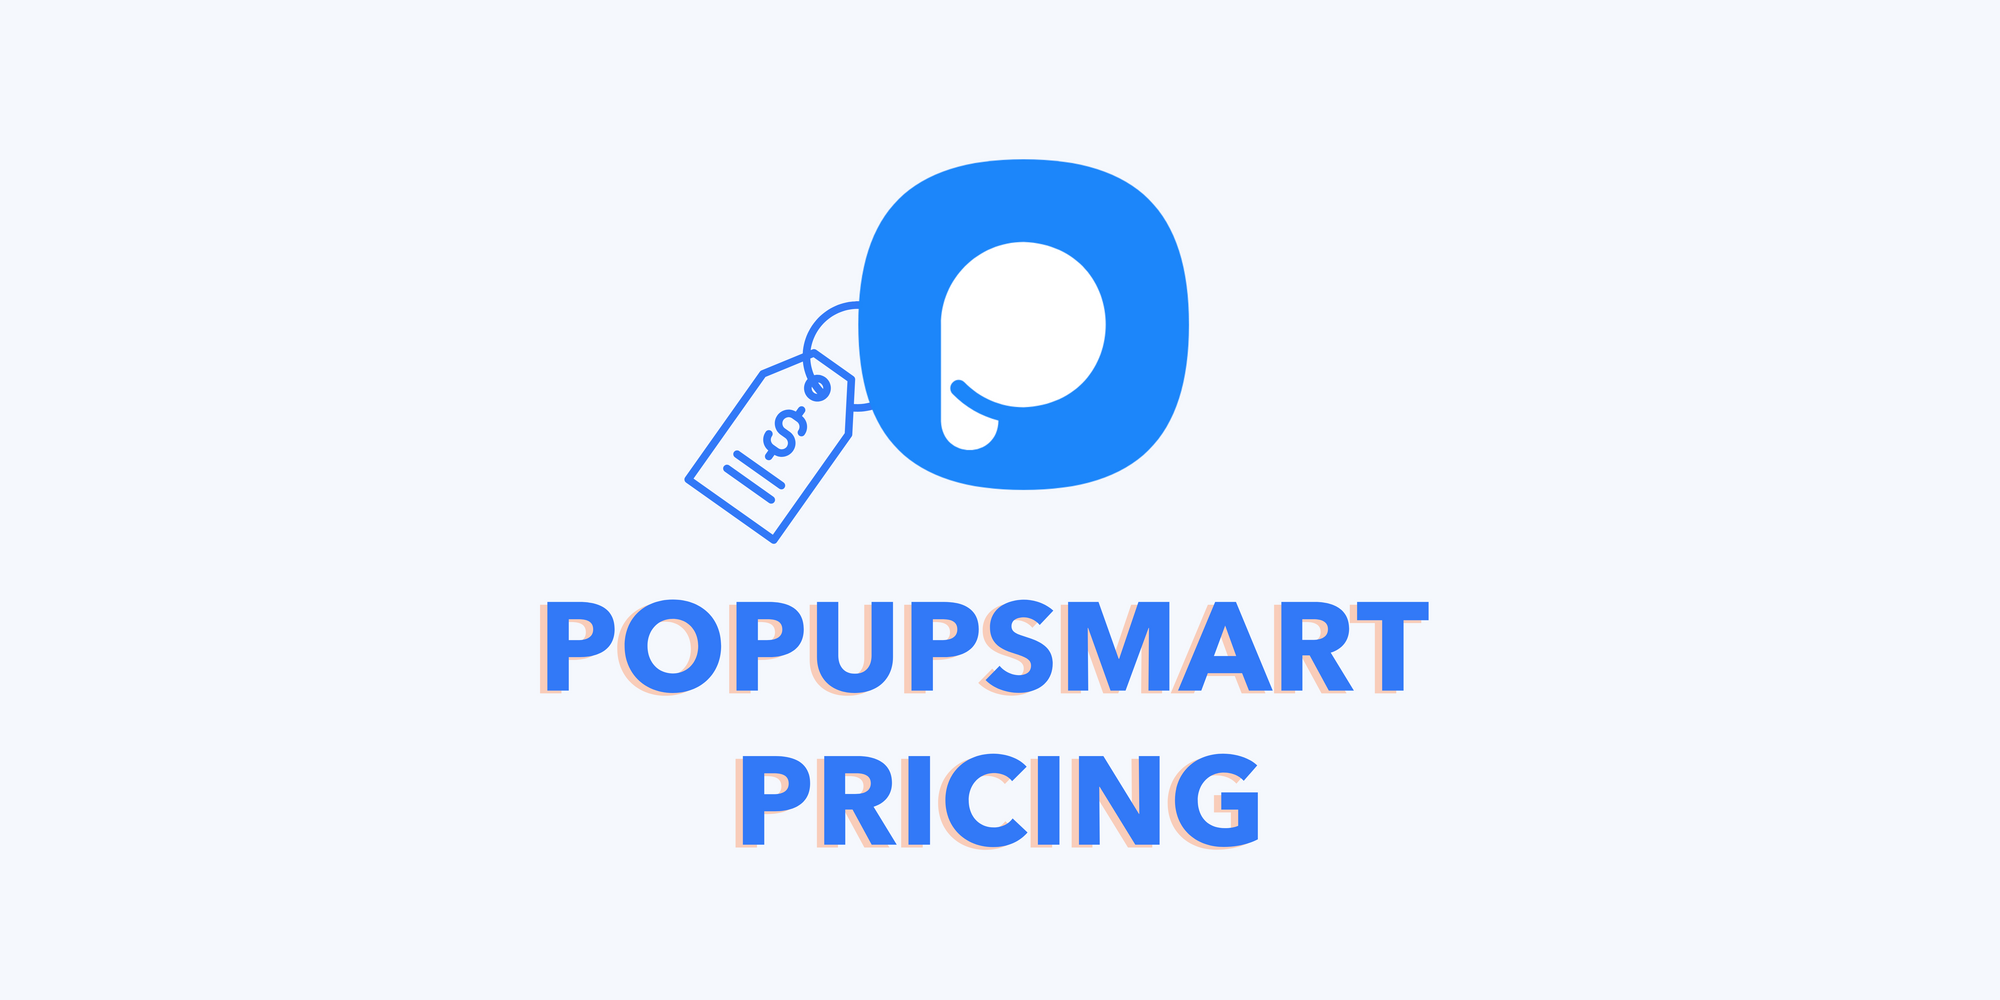 Popupsmart icon with price icon to emphasize the pricing of Popupsmart on blue background